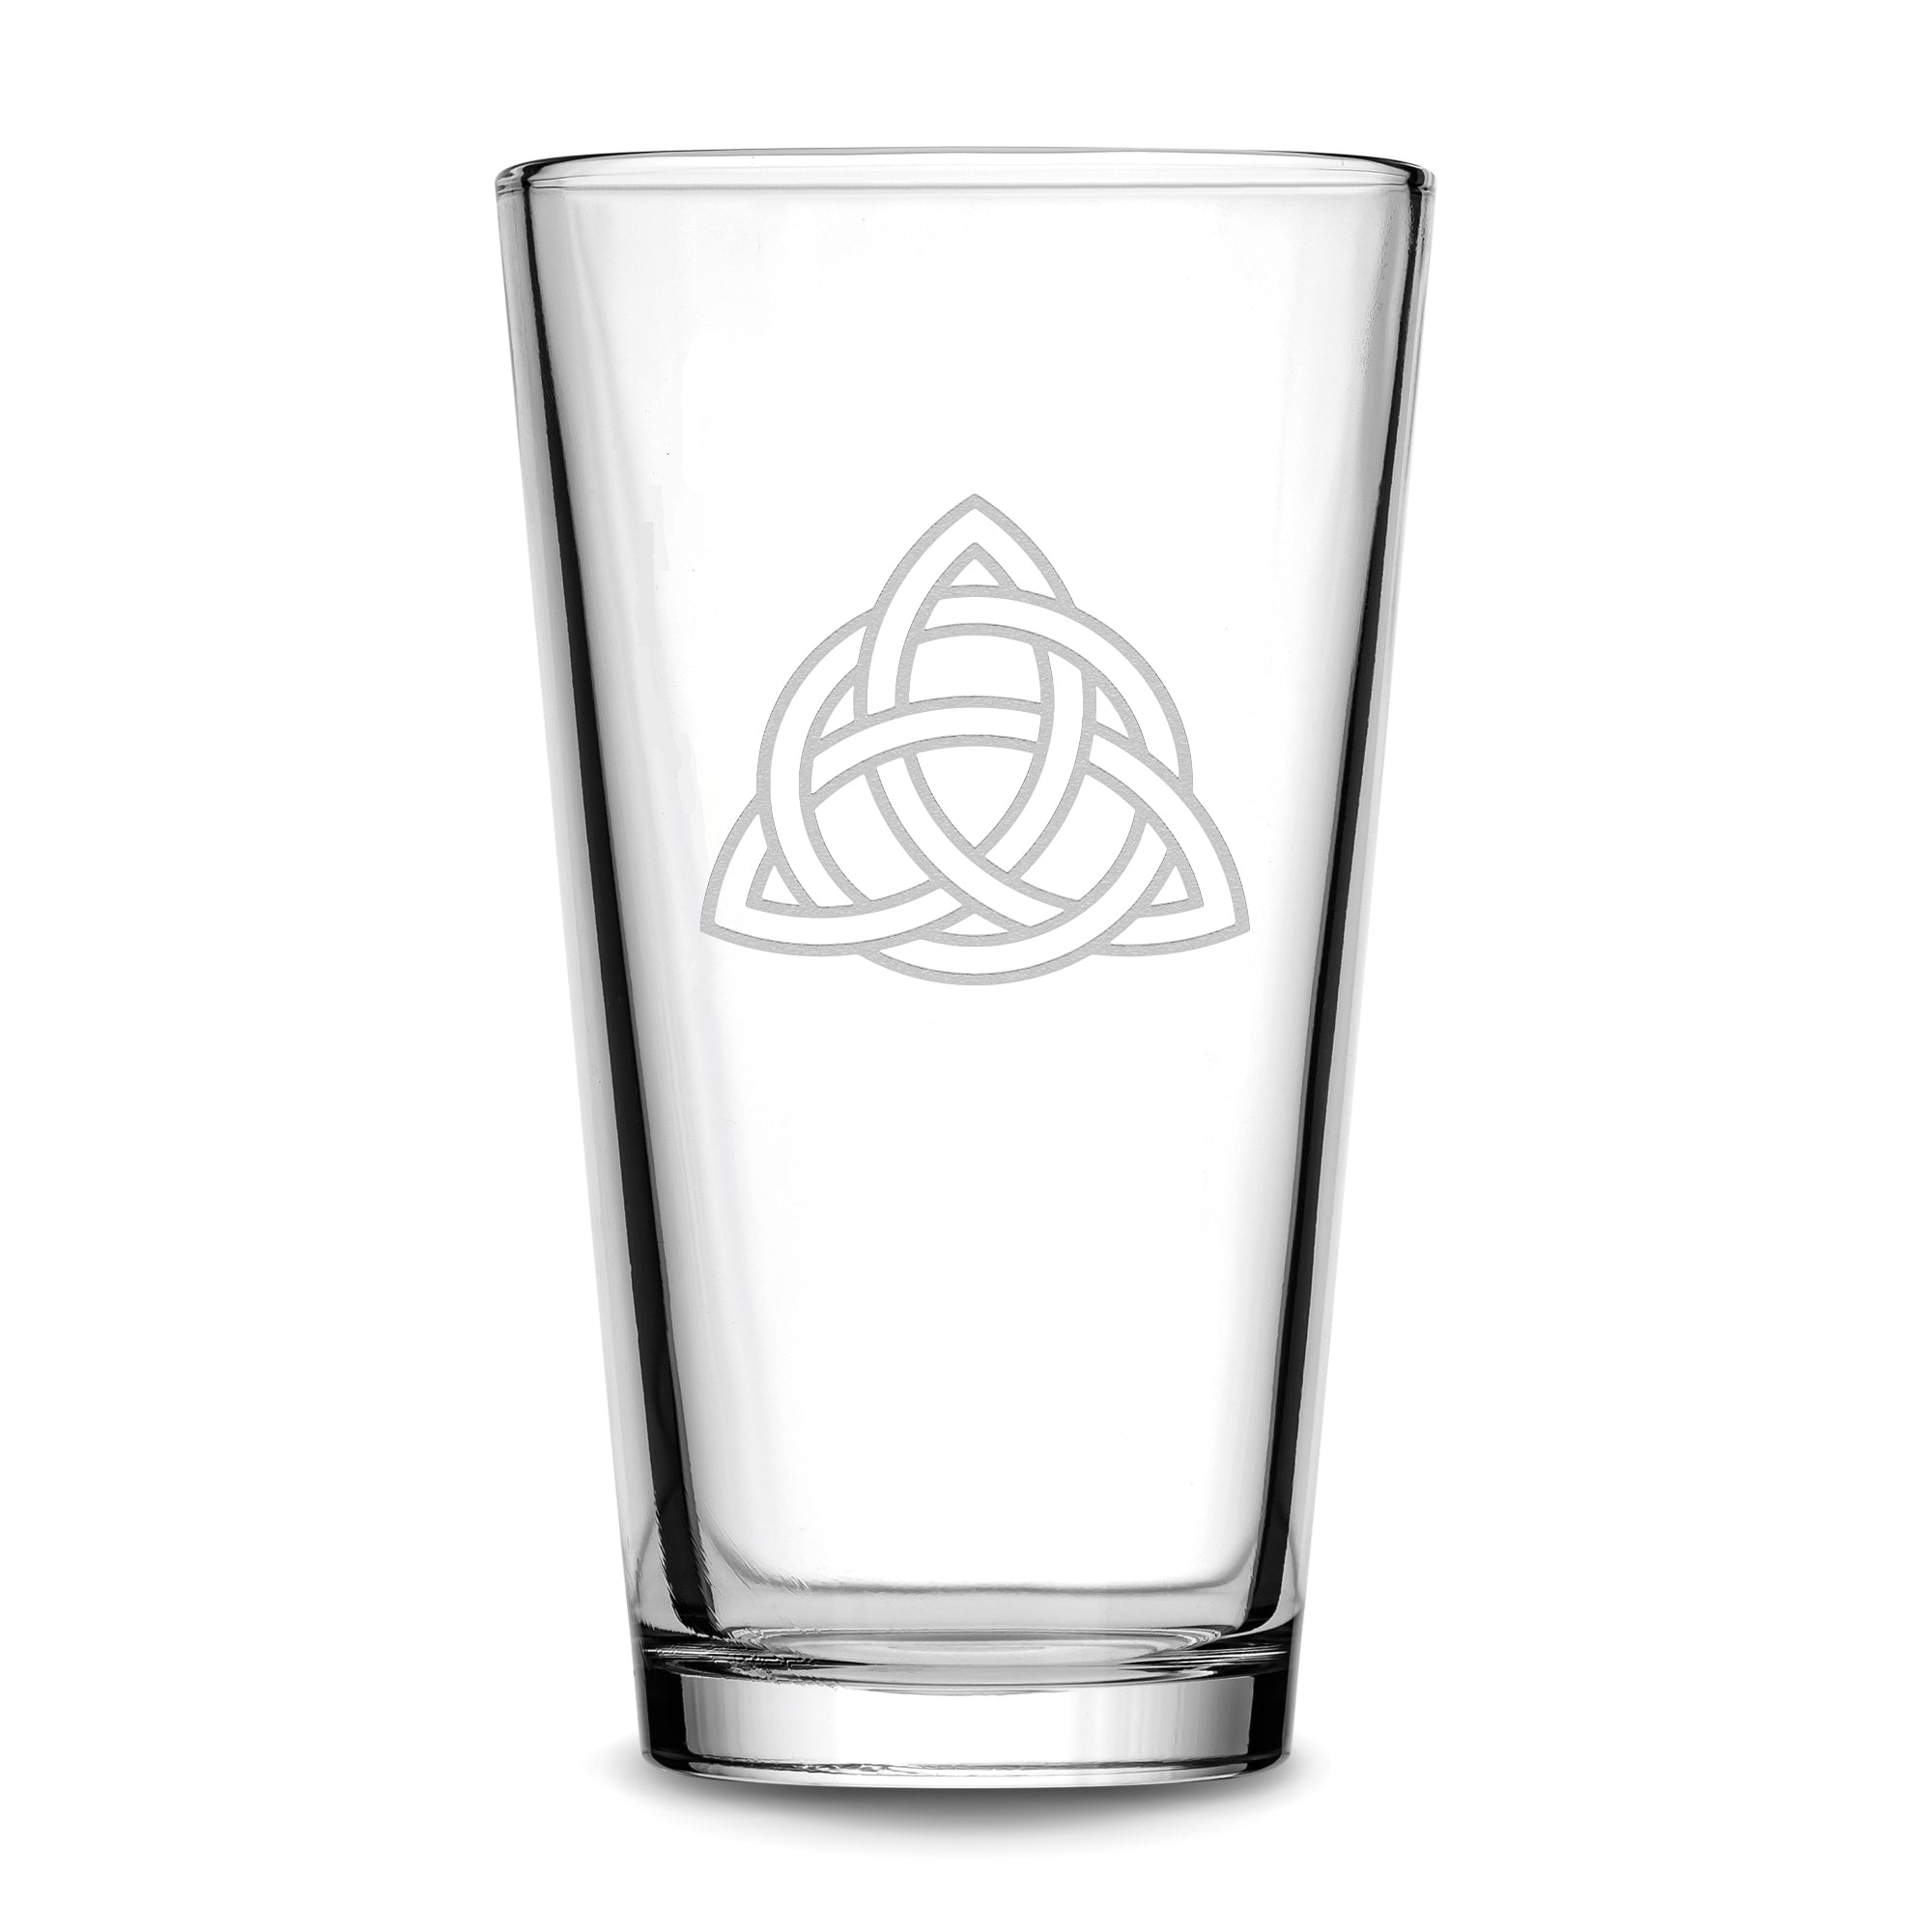 Premium Etched Pint Glass, Celtic Trinity, 16oz, Laser Etched or Hand Etched